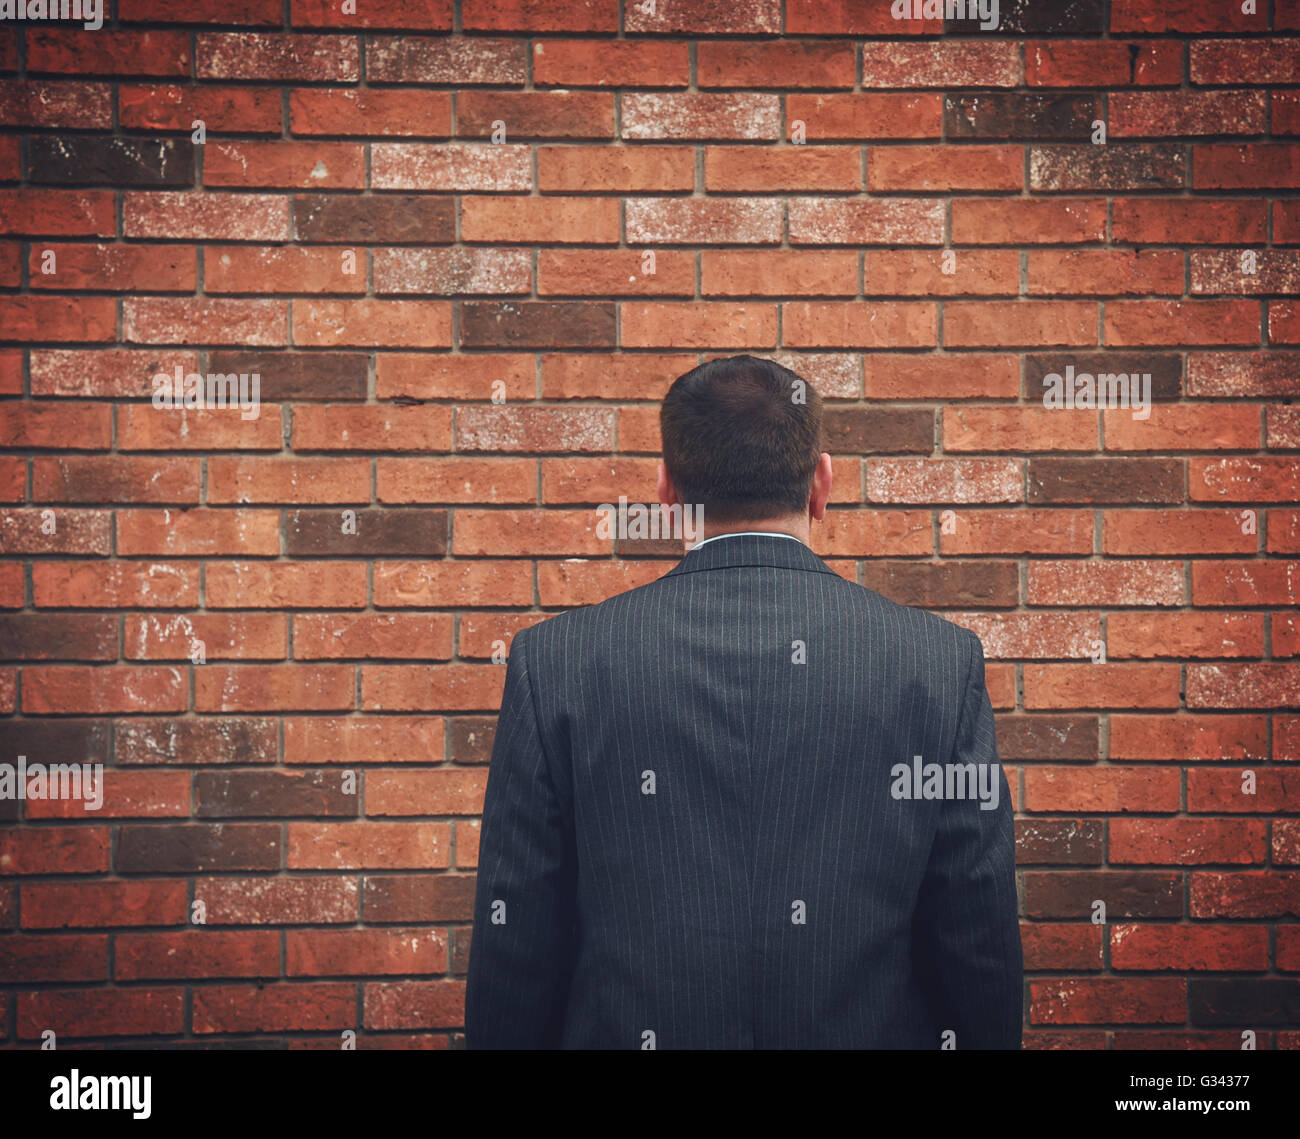 A business man has his back turned and looking at a brick wall. Can represent an obstacle, sadness or a struggle. Stock Photo